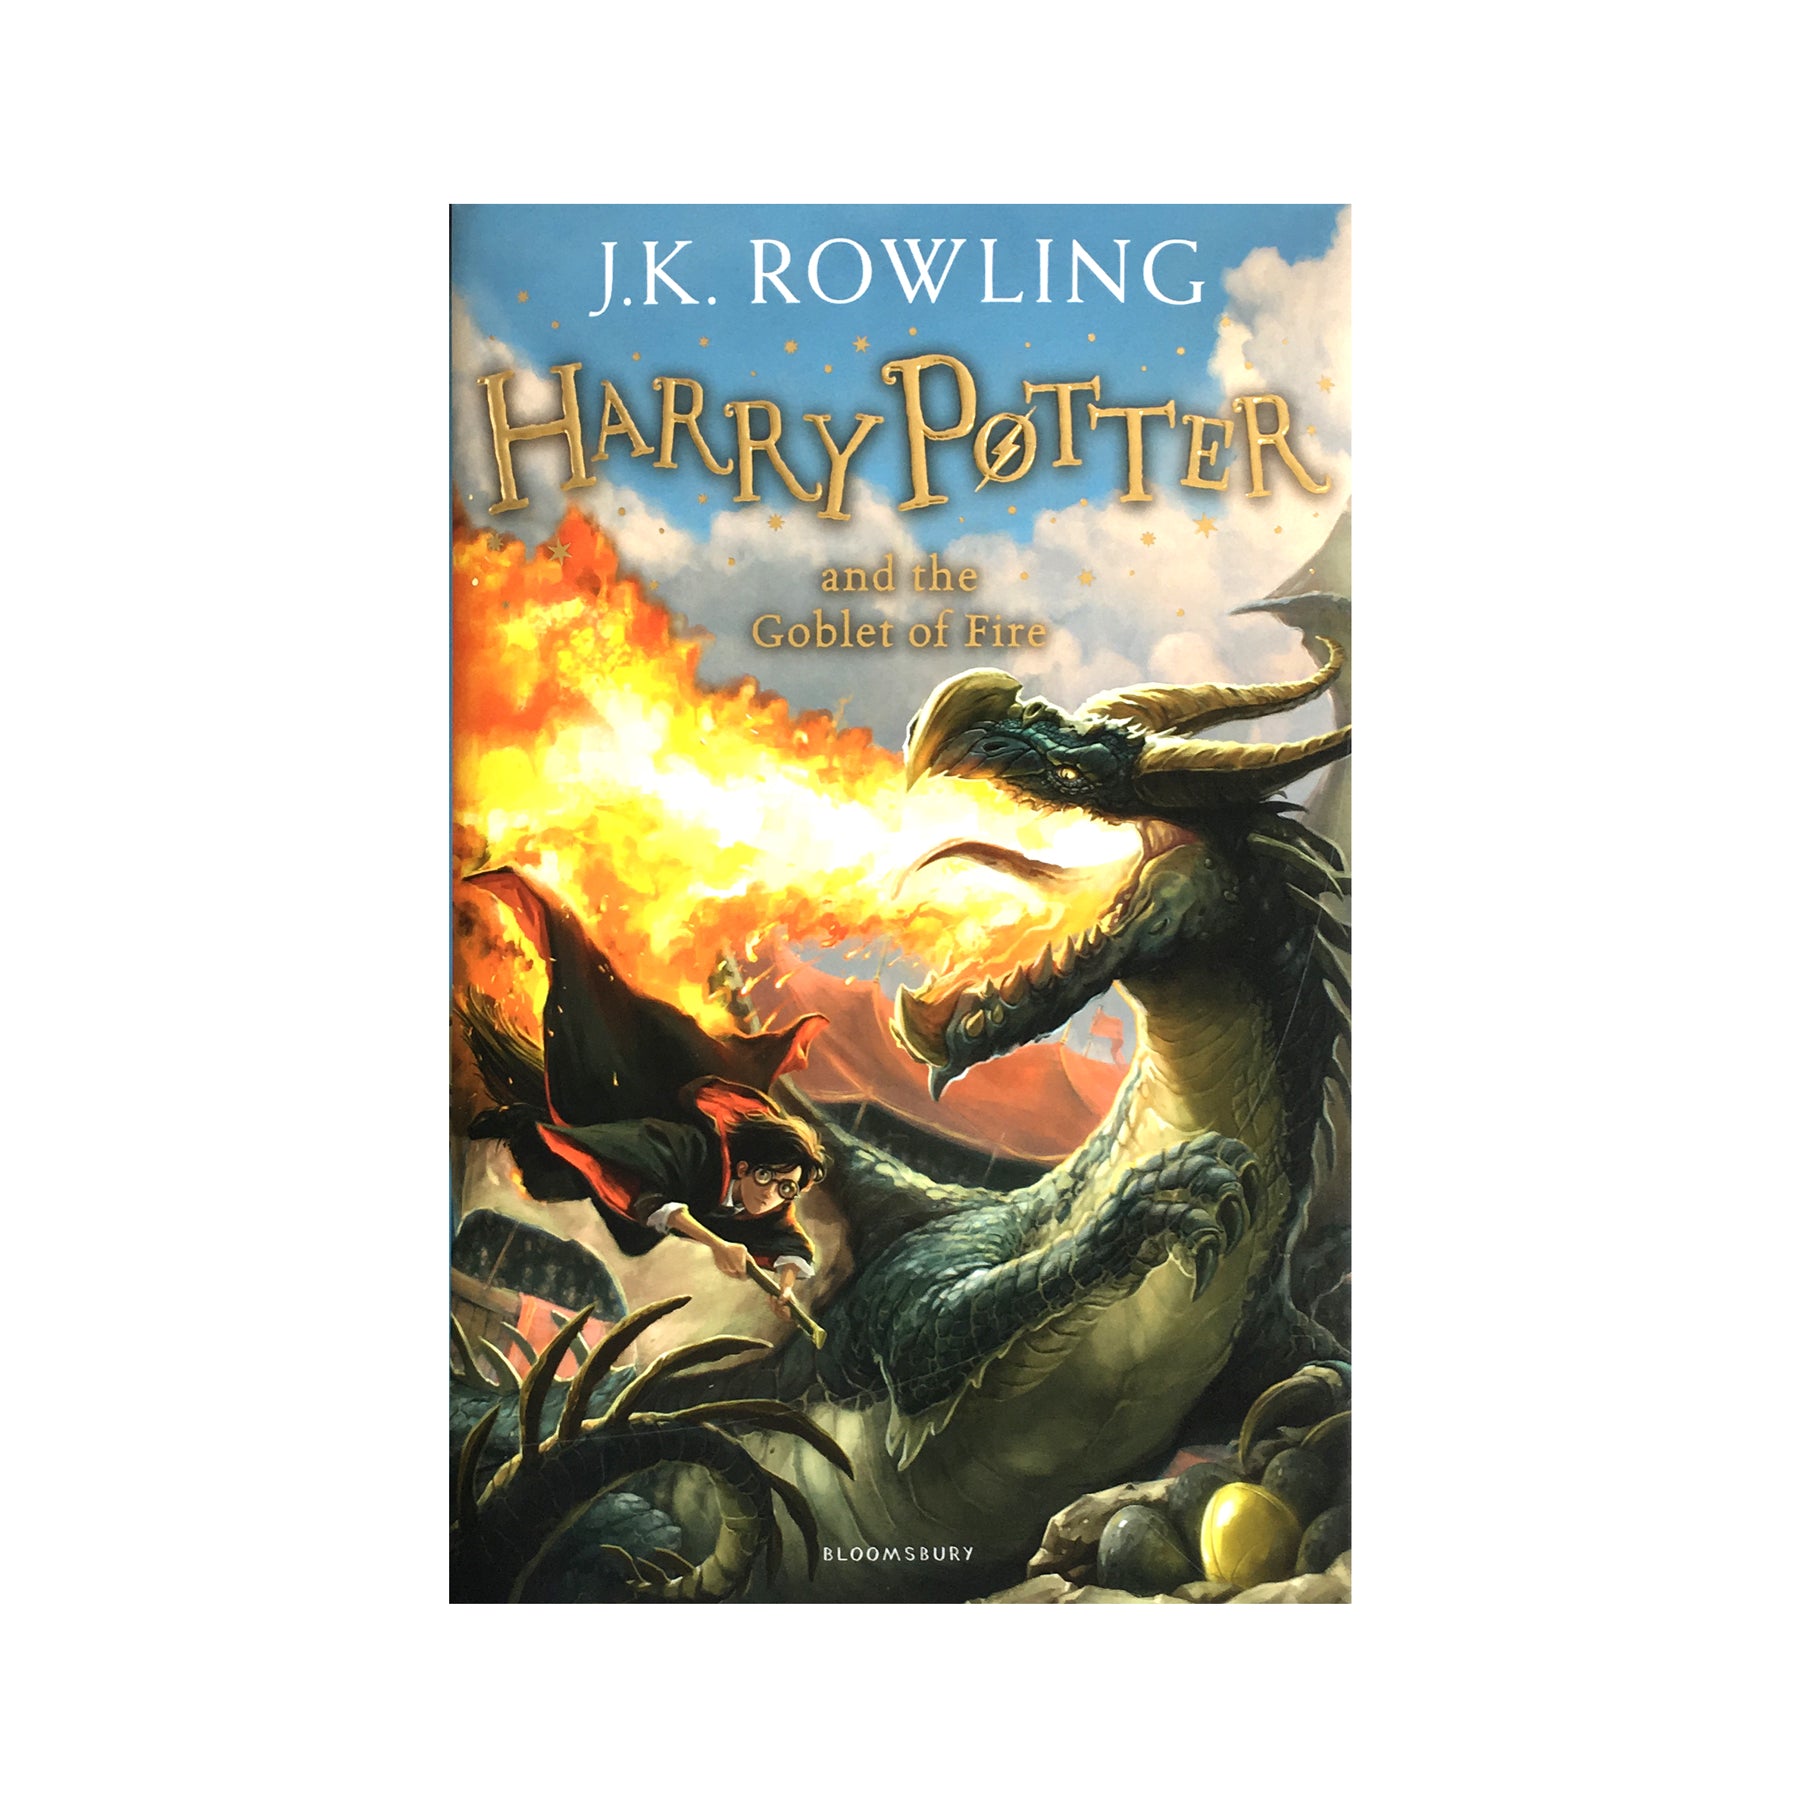 Harry Potter  Box Set - Complete Collection - Children's Hardcover